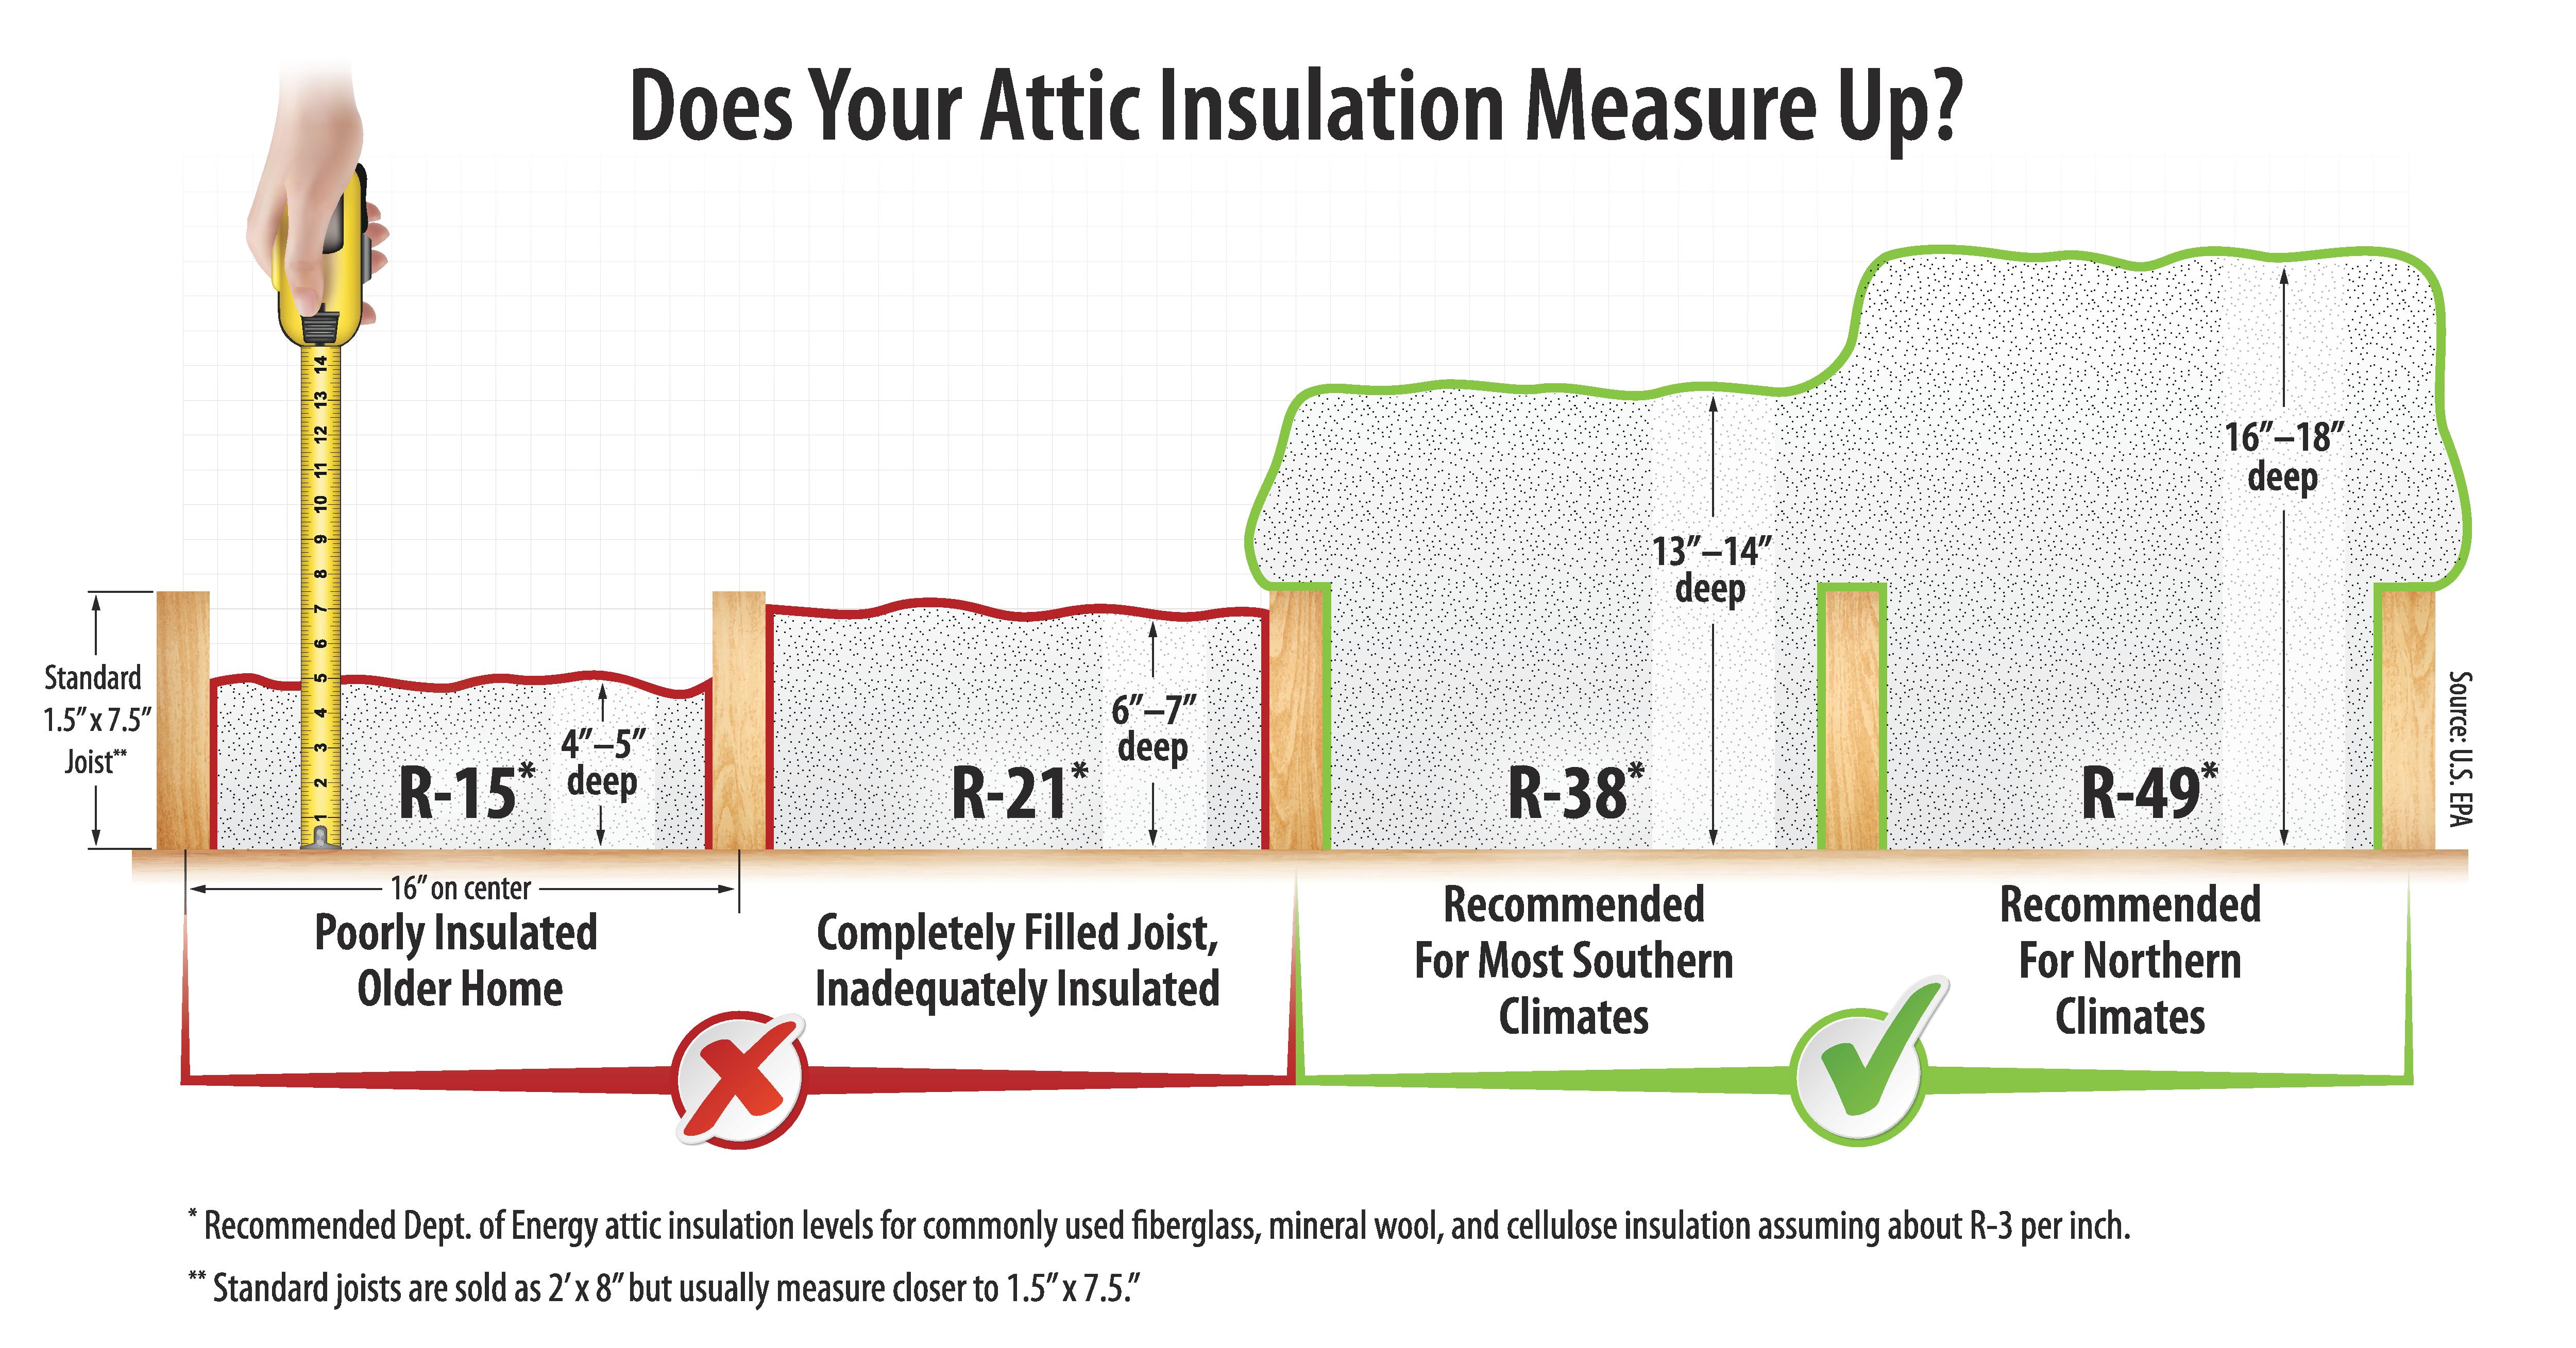 Use a measuring tape to check the insulation level in your attic